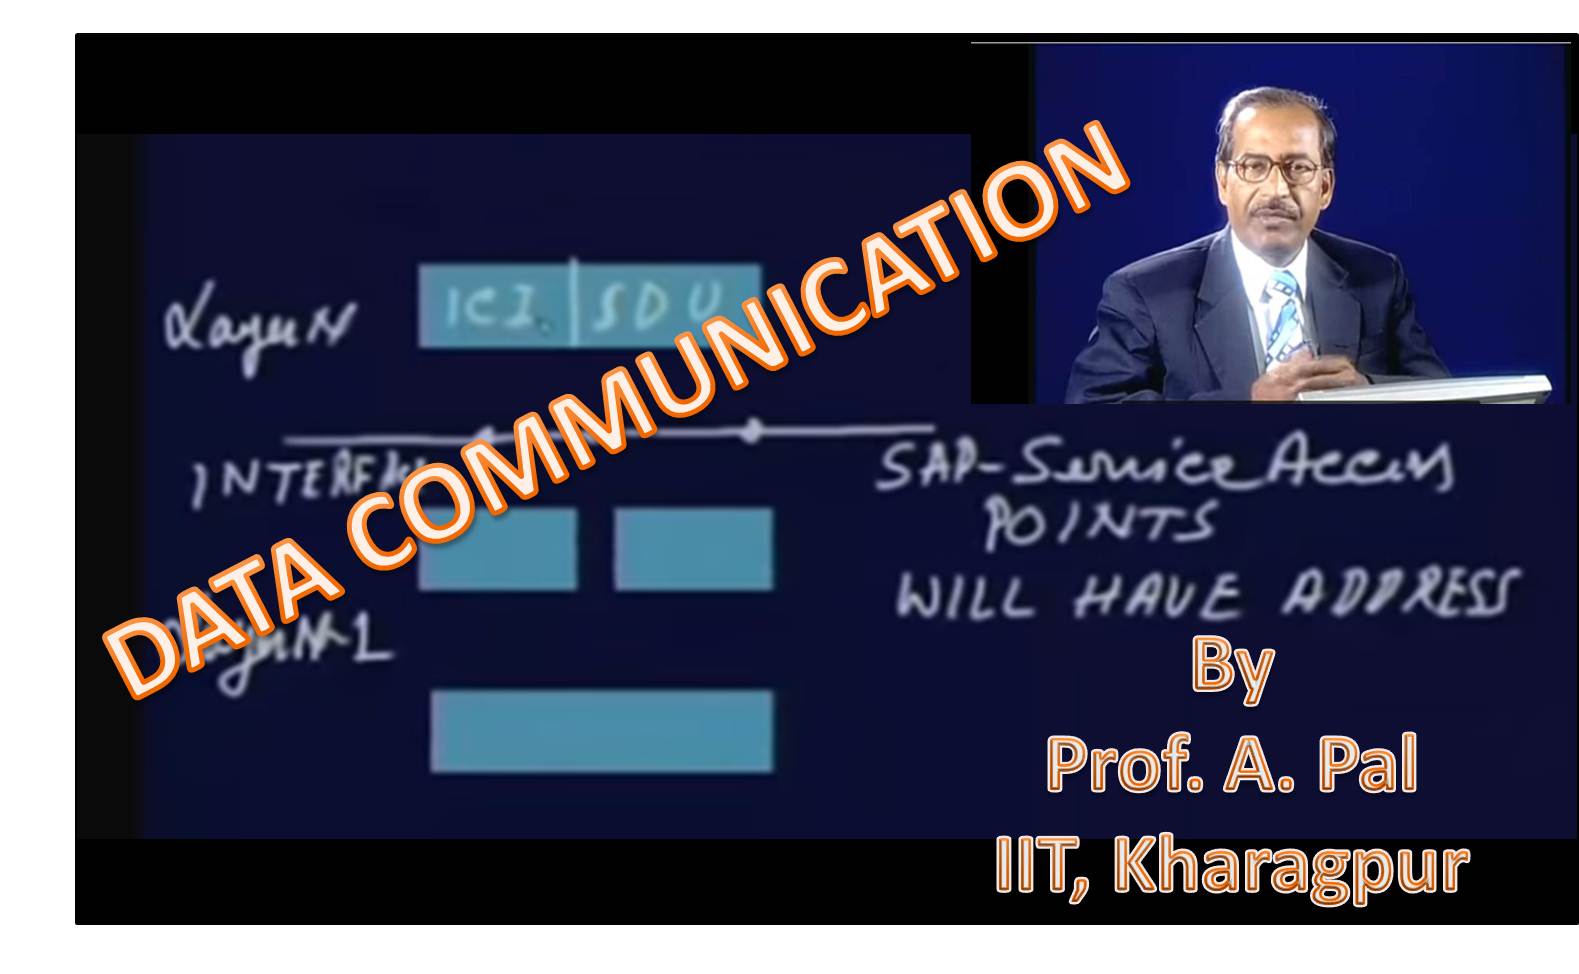 http://study.aisectonline.com/images/SubCategory/Video Lecture Series on Data Communication by Prof. A. Pal, IIT Kharagpur.jpg